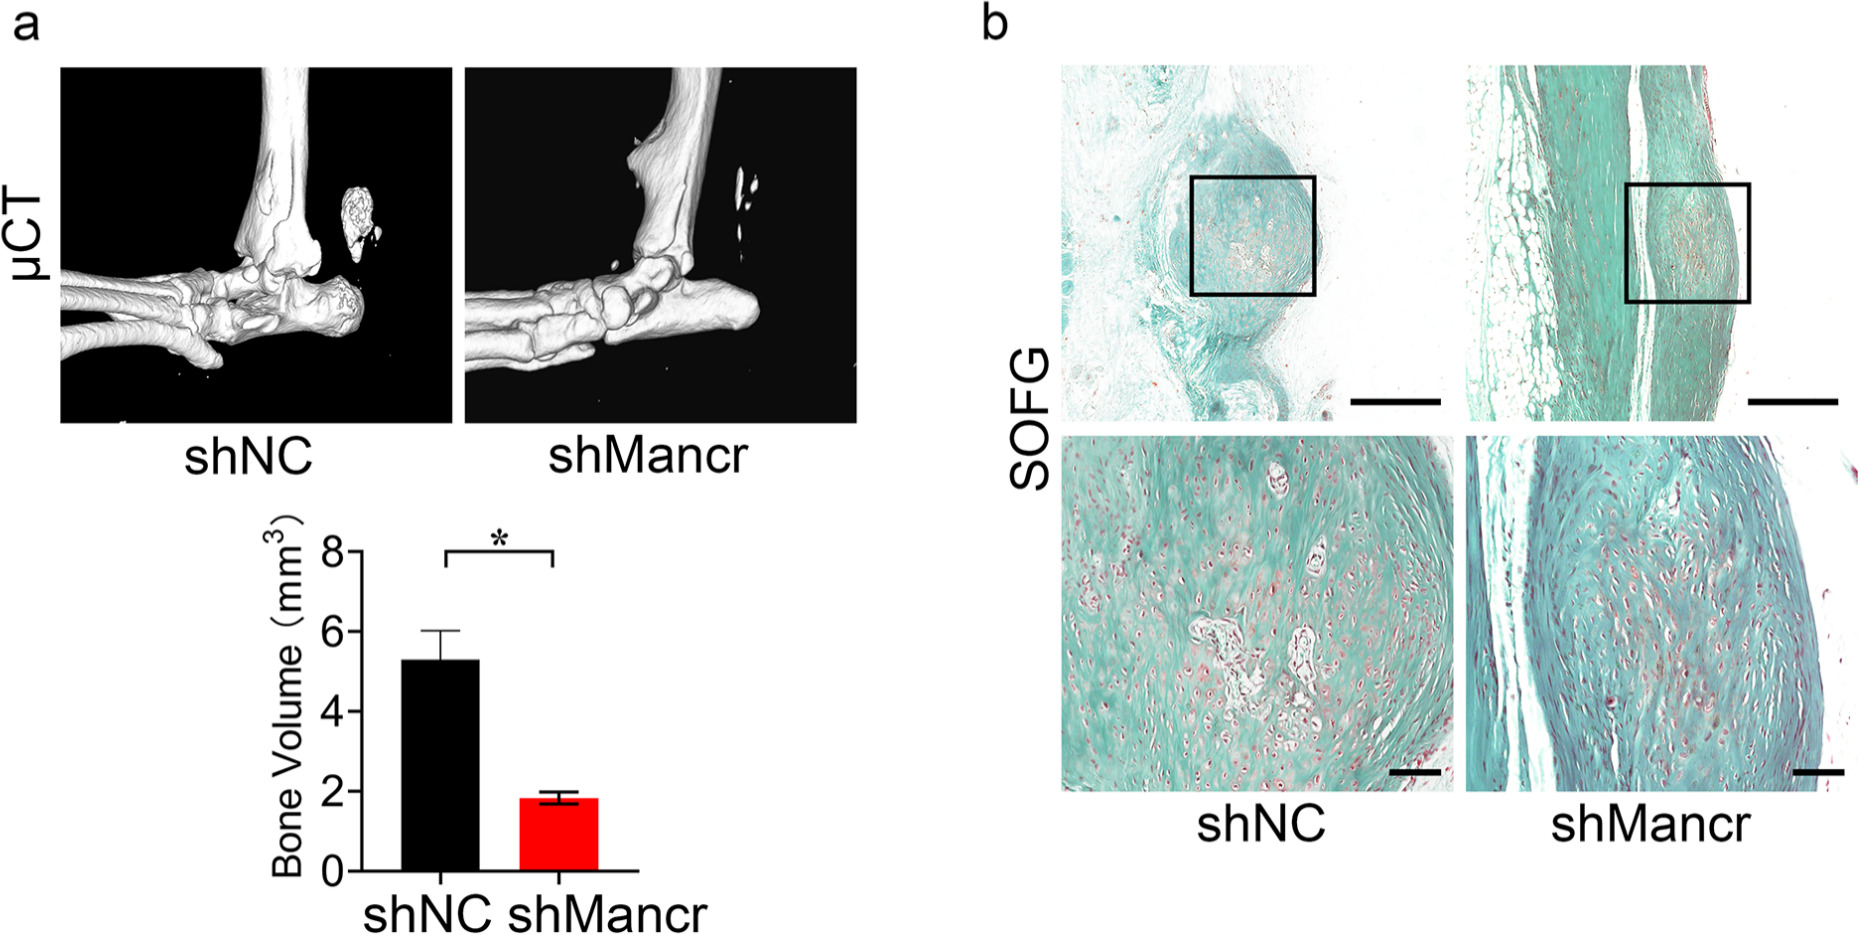 Fig. 5 
            shMancr suppresses the new formation in vivo. a) Micro-CT (μCT) analysis and quantification of new bone in heterotopic ossification (HO) model treated with shNC or shMancr, n = 10. b) Safranin O Fast Green (SOFG) staining of HO model treated with shNC or shMancr. Scale bar = 200 μm (upper panel), scale bar = 80 μm (lower panel). Mancr, mitotically associated long non-coding RNA.
          